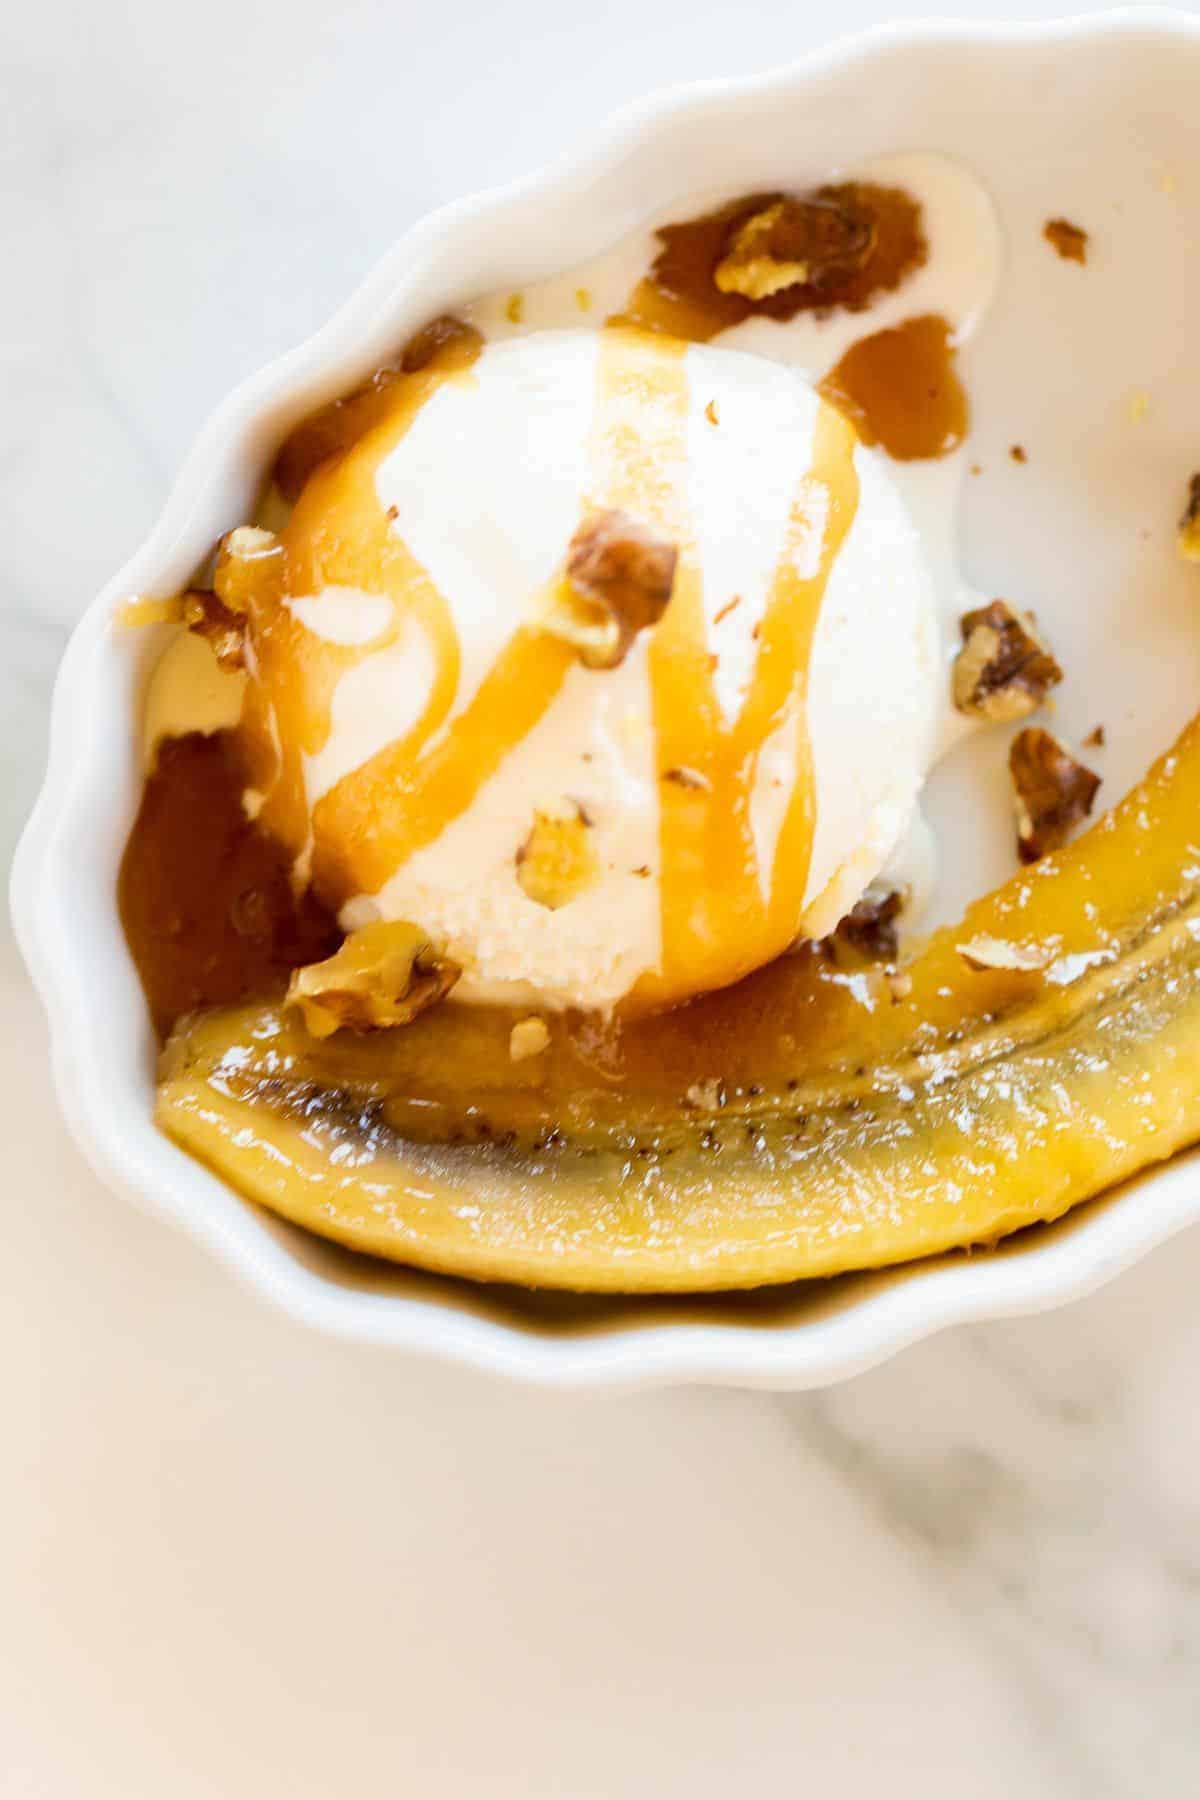 An oval ramekin filled with a bananas foster recipe with a scoop of ice cream drizzled in caramel.